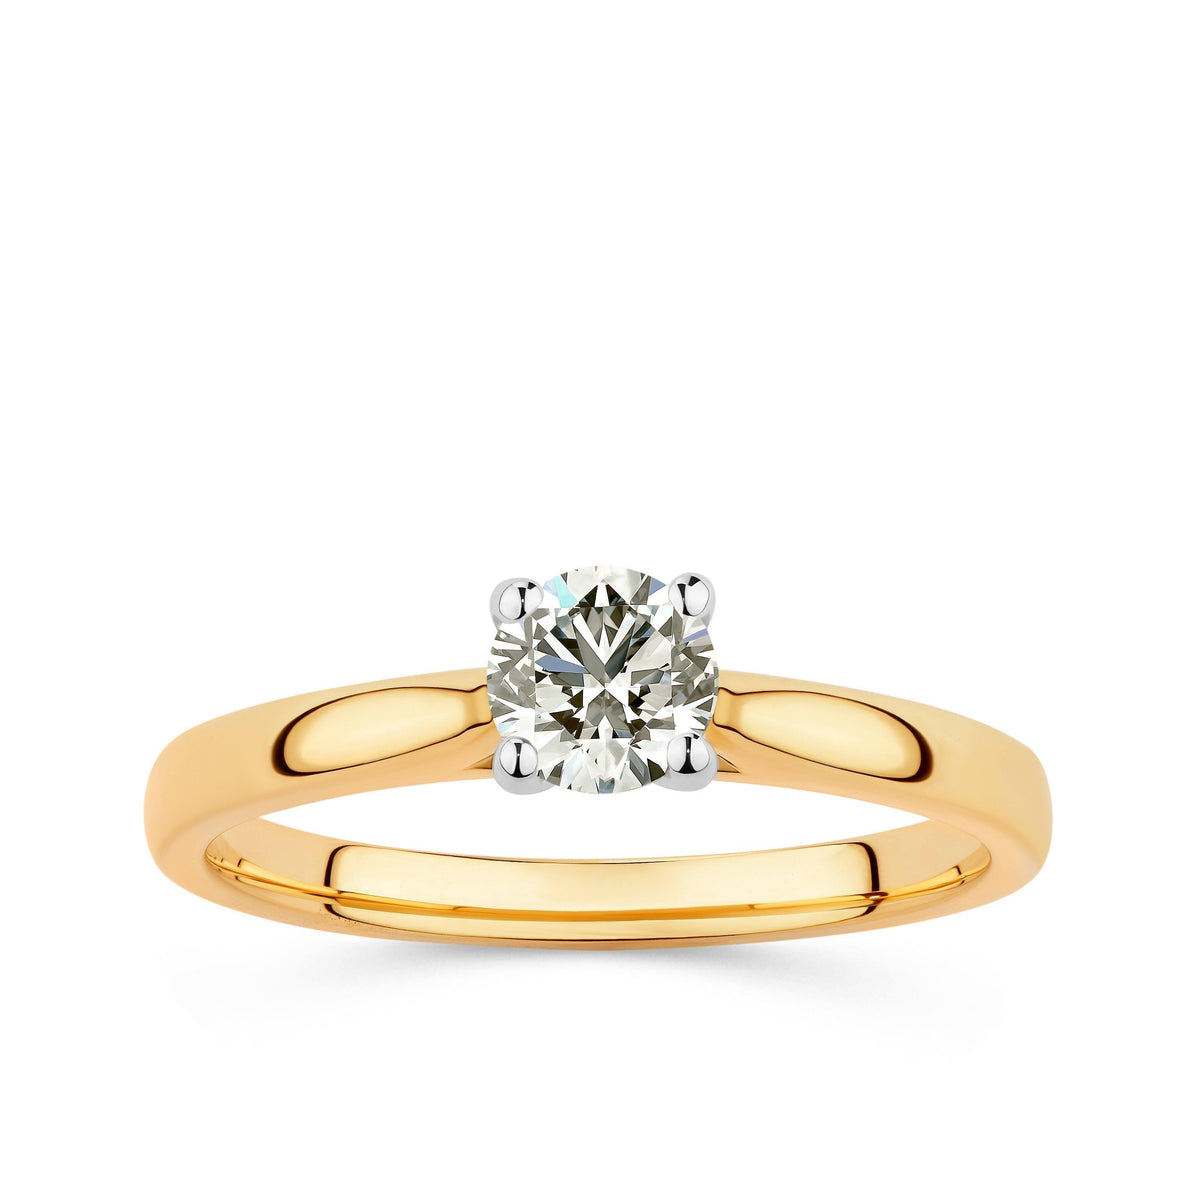 Rendition 0.50ct TW Diamond Solitaire Ring in 9ct Yellow & White Gold - Wallace Bishop